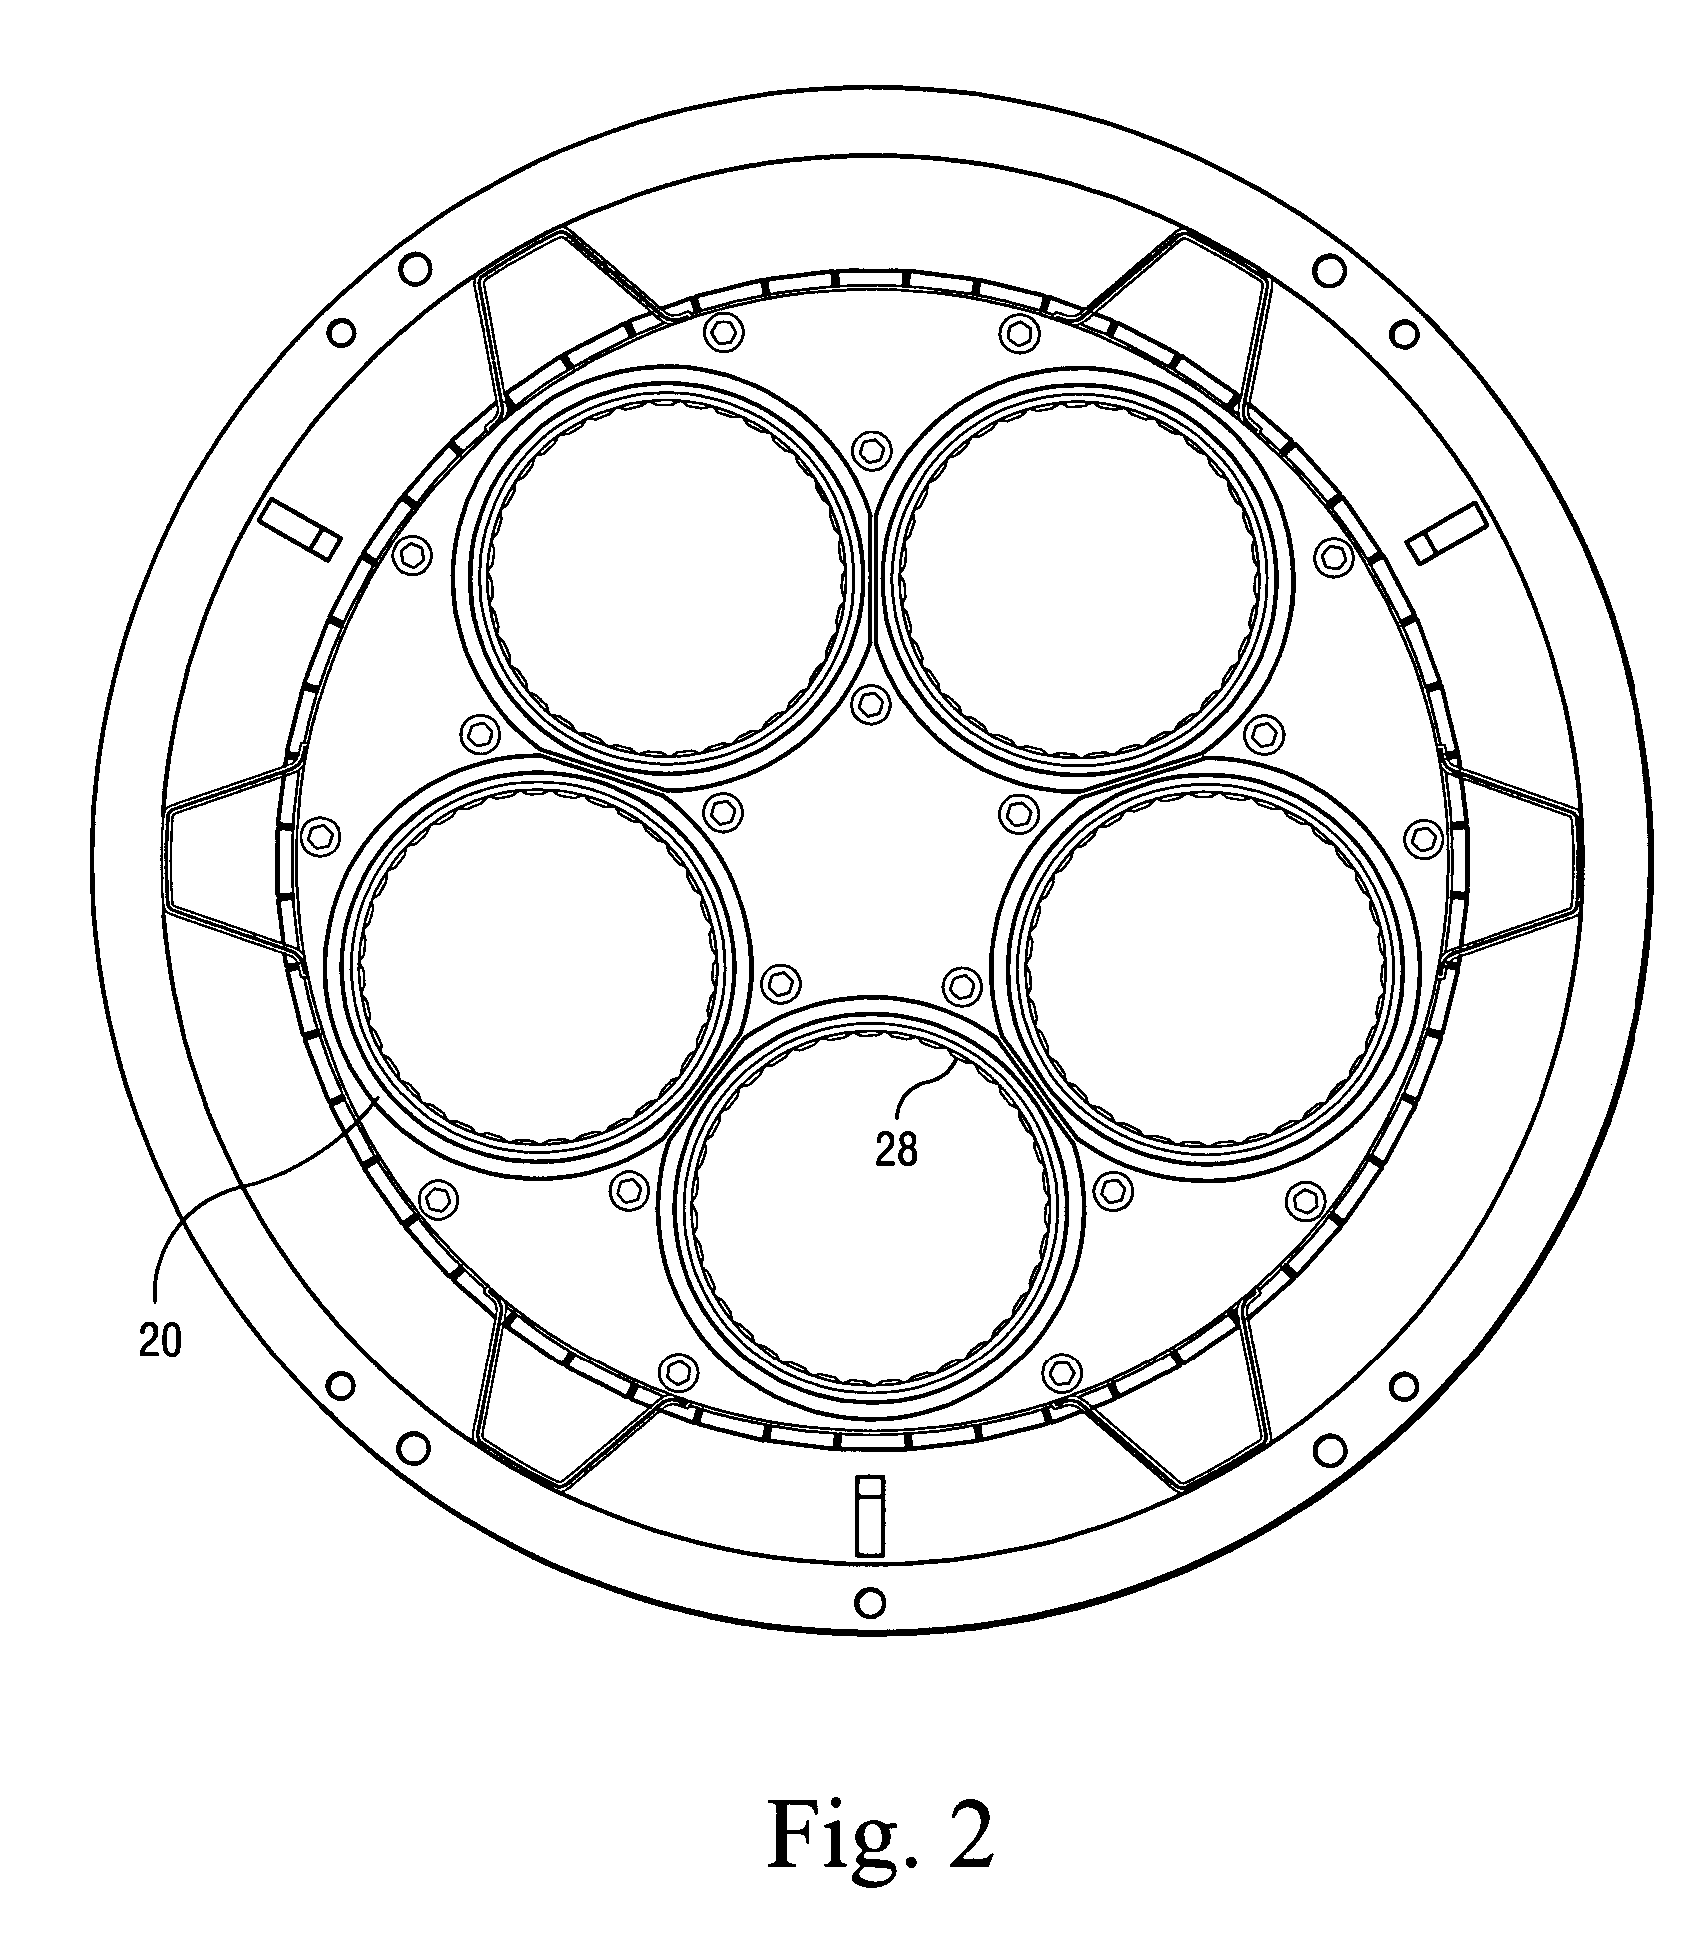 Combustor and cap assemblies for combustors in a gas turbine